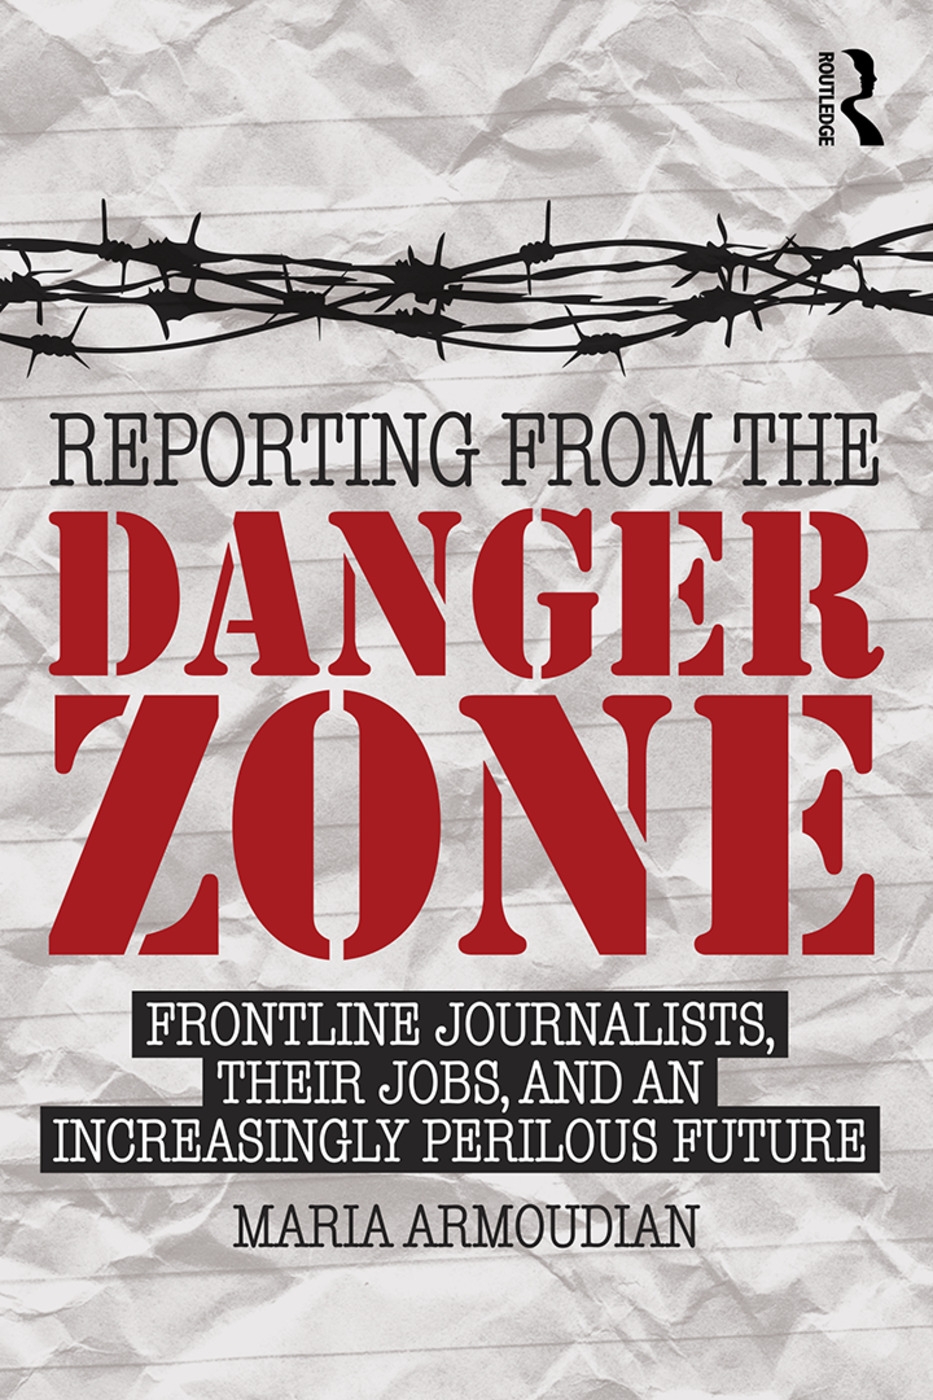 Reporting from the Danger Zone: Frontline Journalists, Their Jobs, and an Increasingly Perilous Future